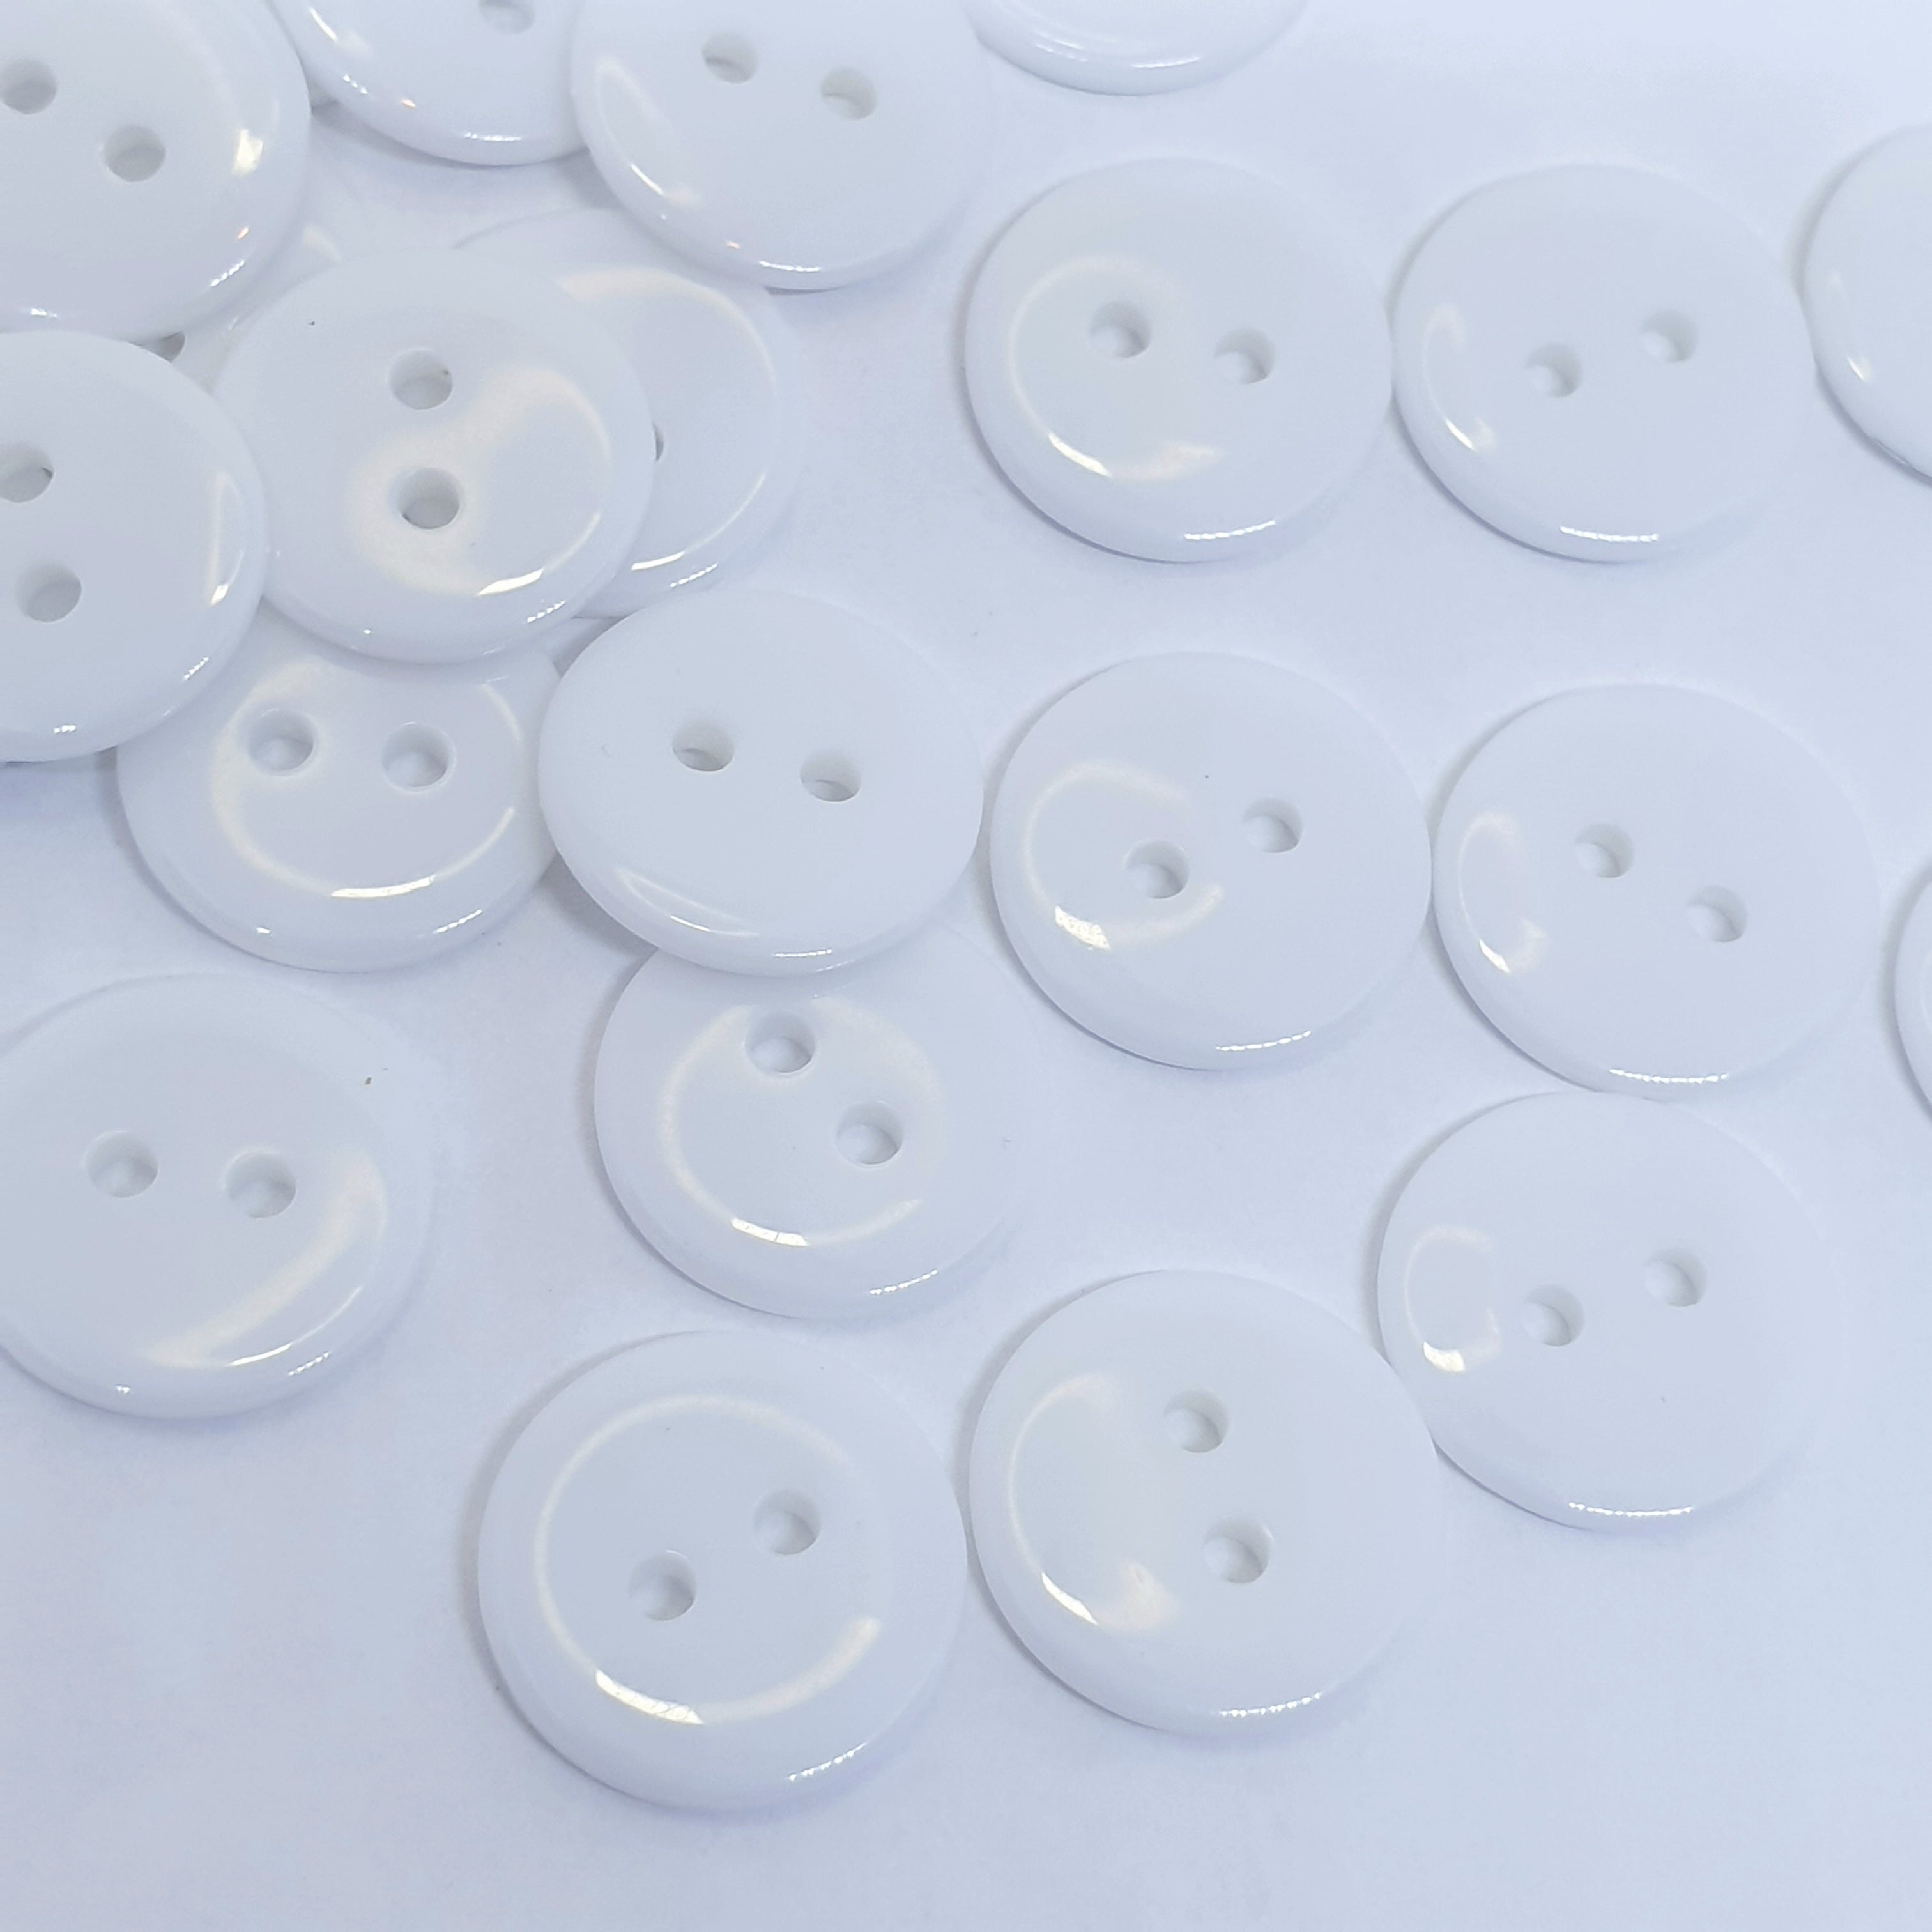 MajorCrafts 50pcs 18mm Glossy White 2 Holes Round Resin Sewing Buttons